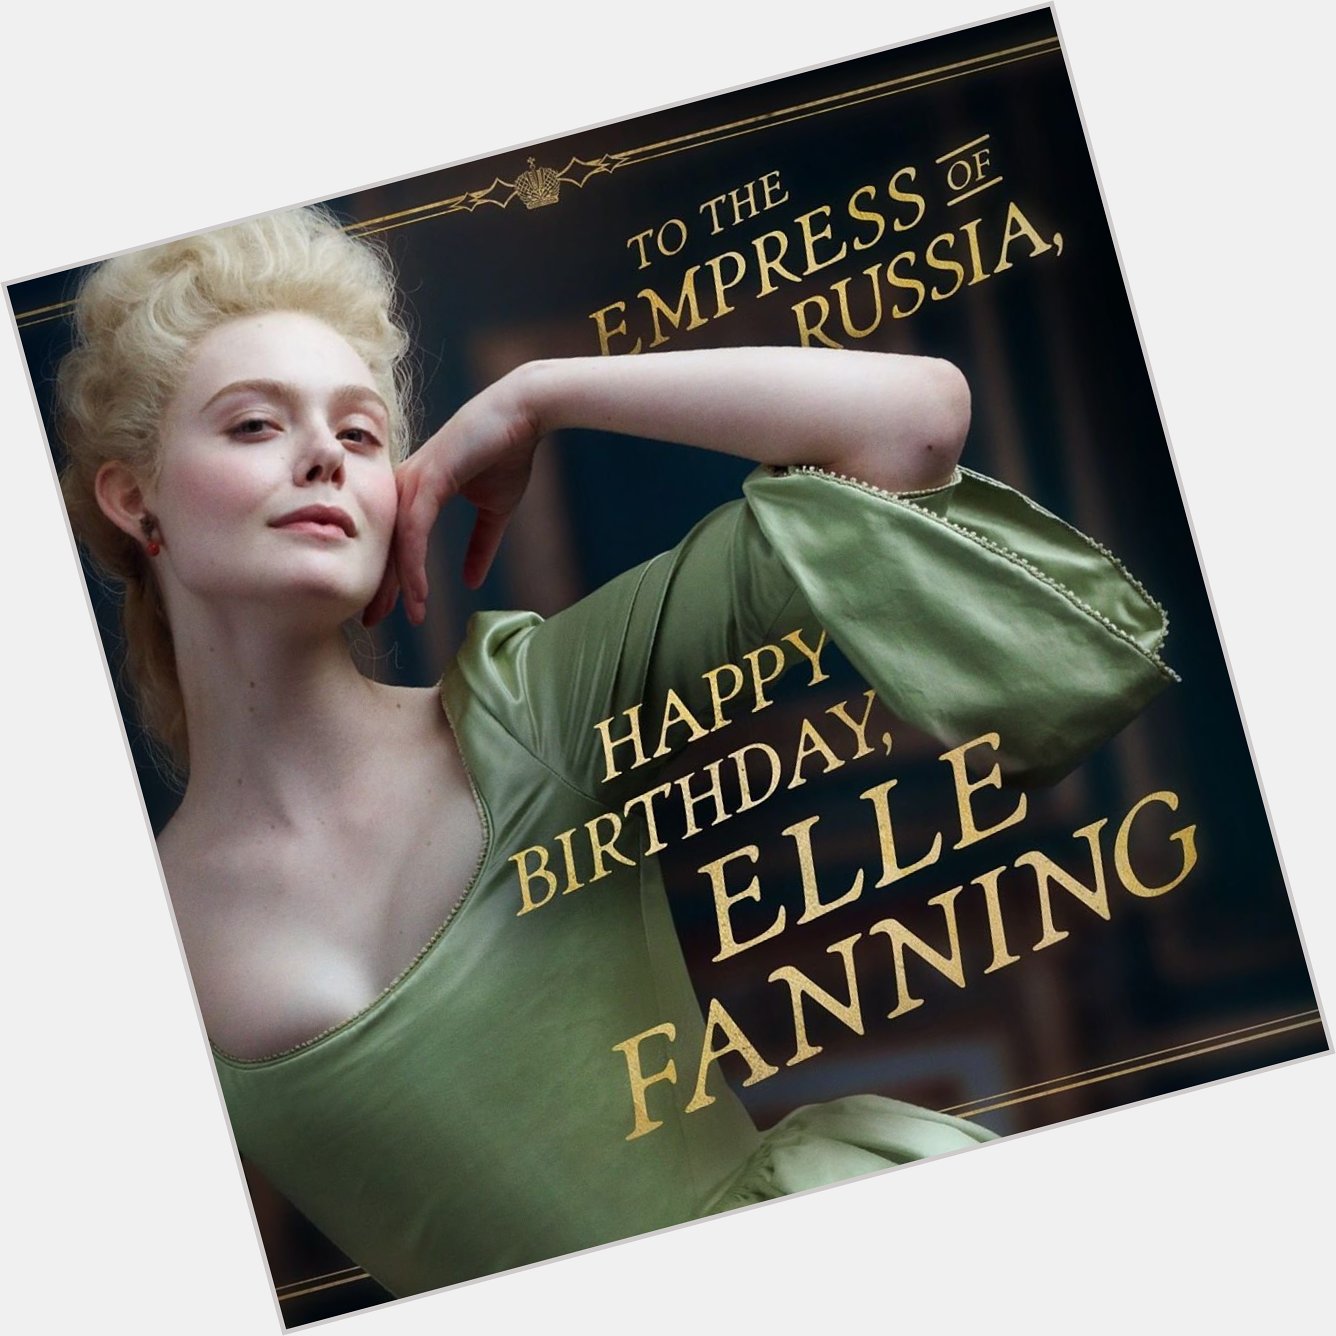 Happy 24th Birthday to American Actress,

Miss Mary Elle Fanning.       